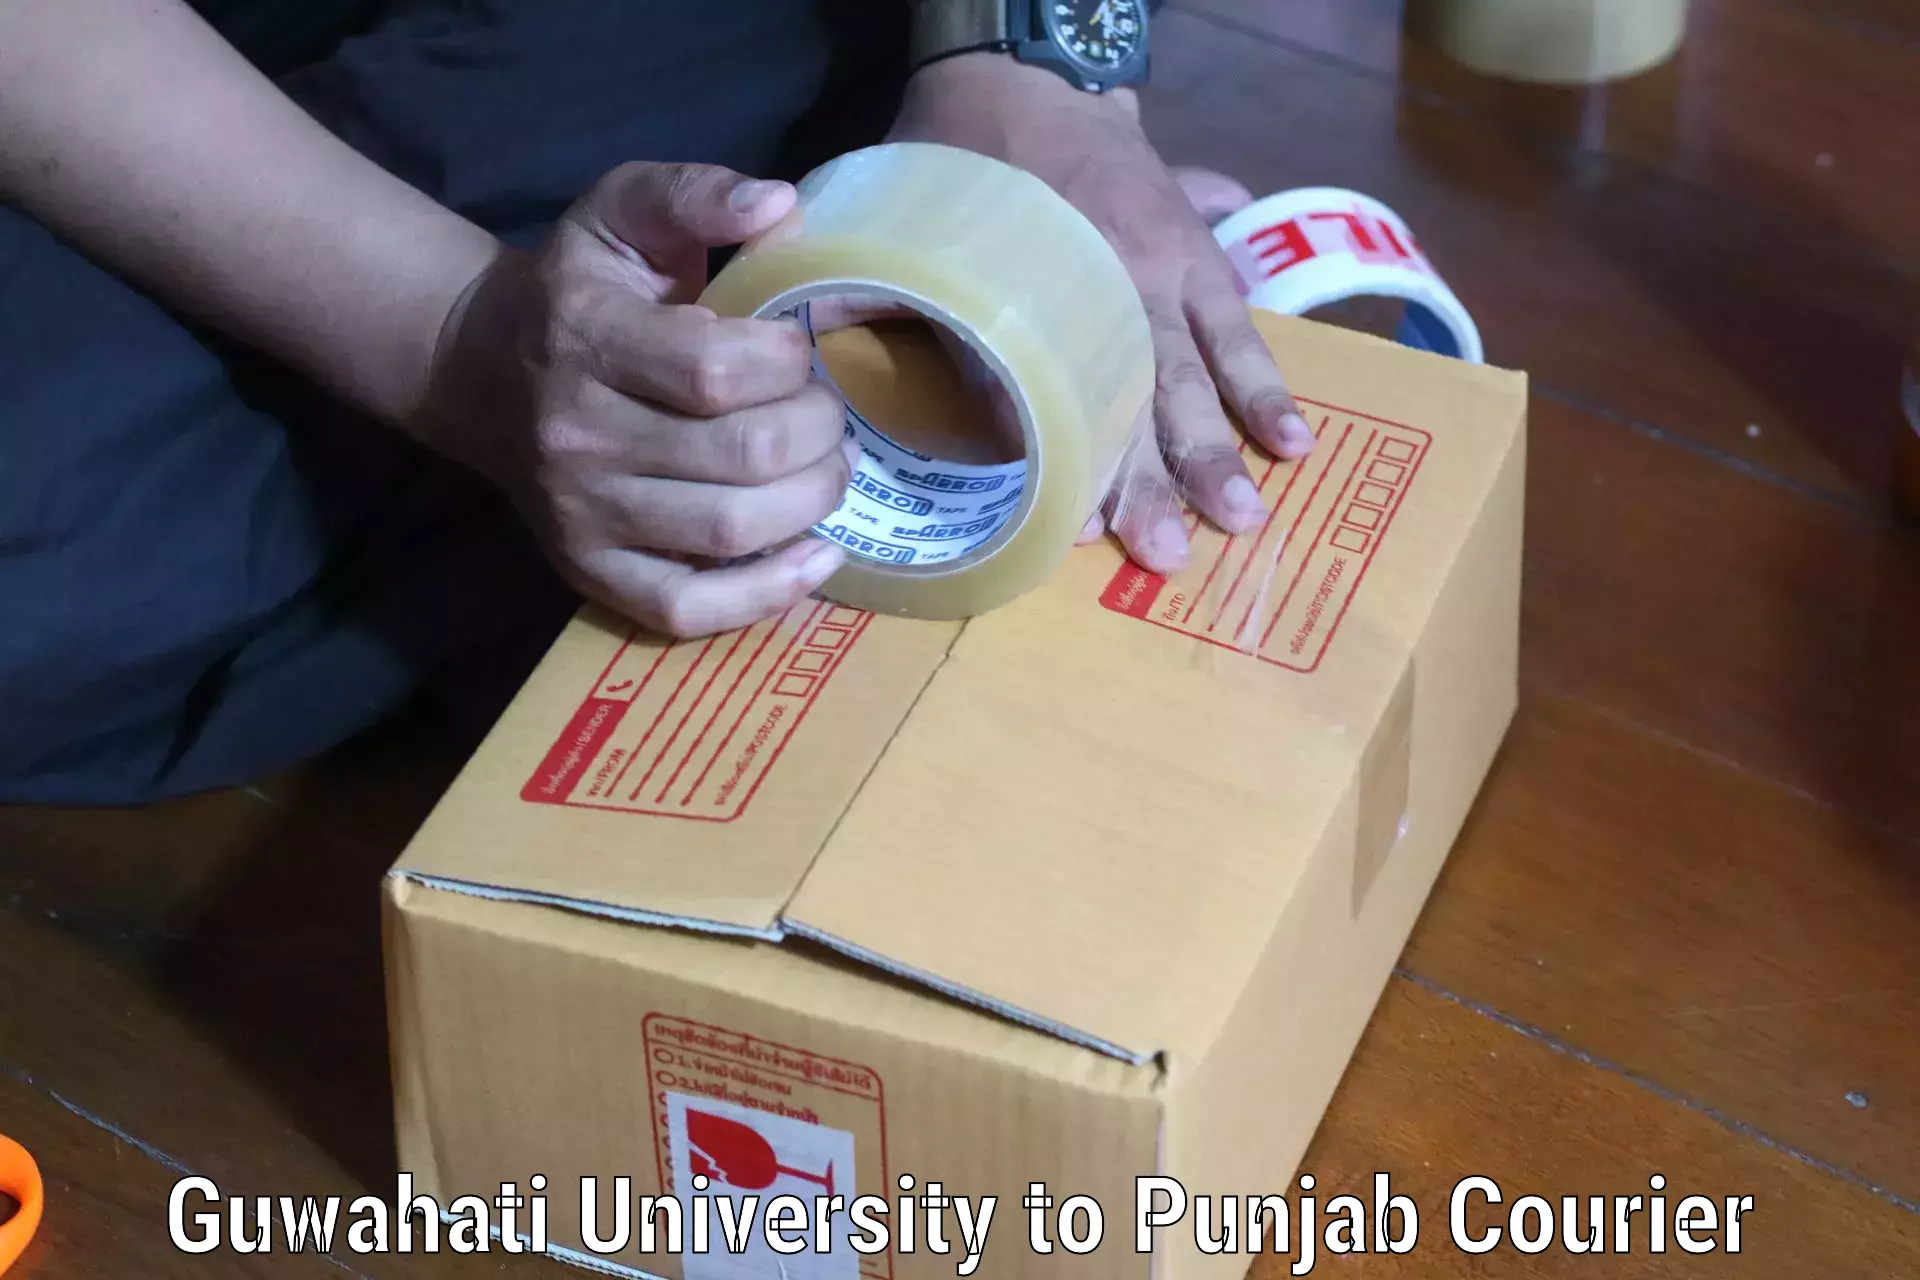 High-quality delivery services Guwahati University to Zirakpur